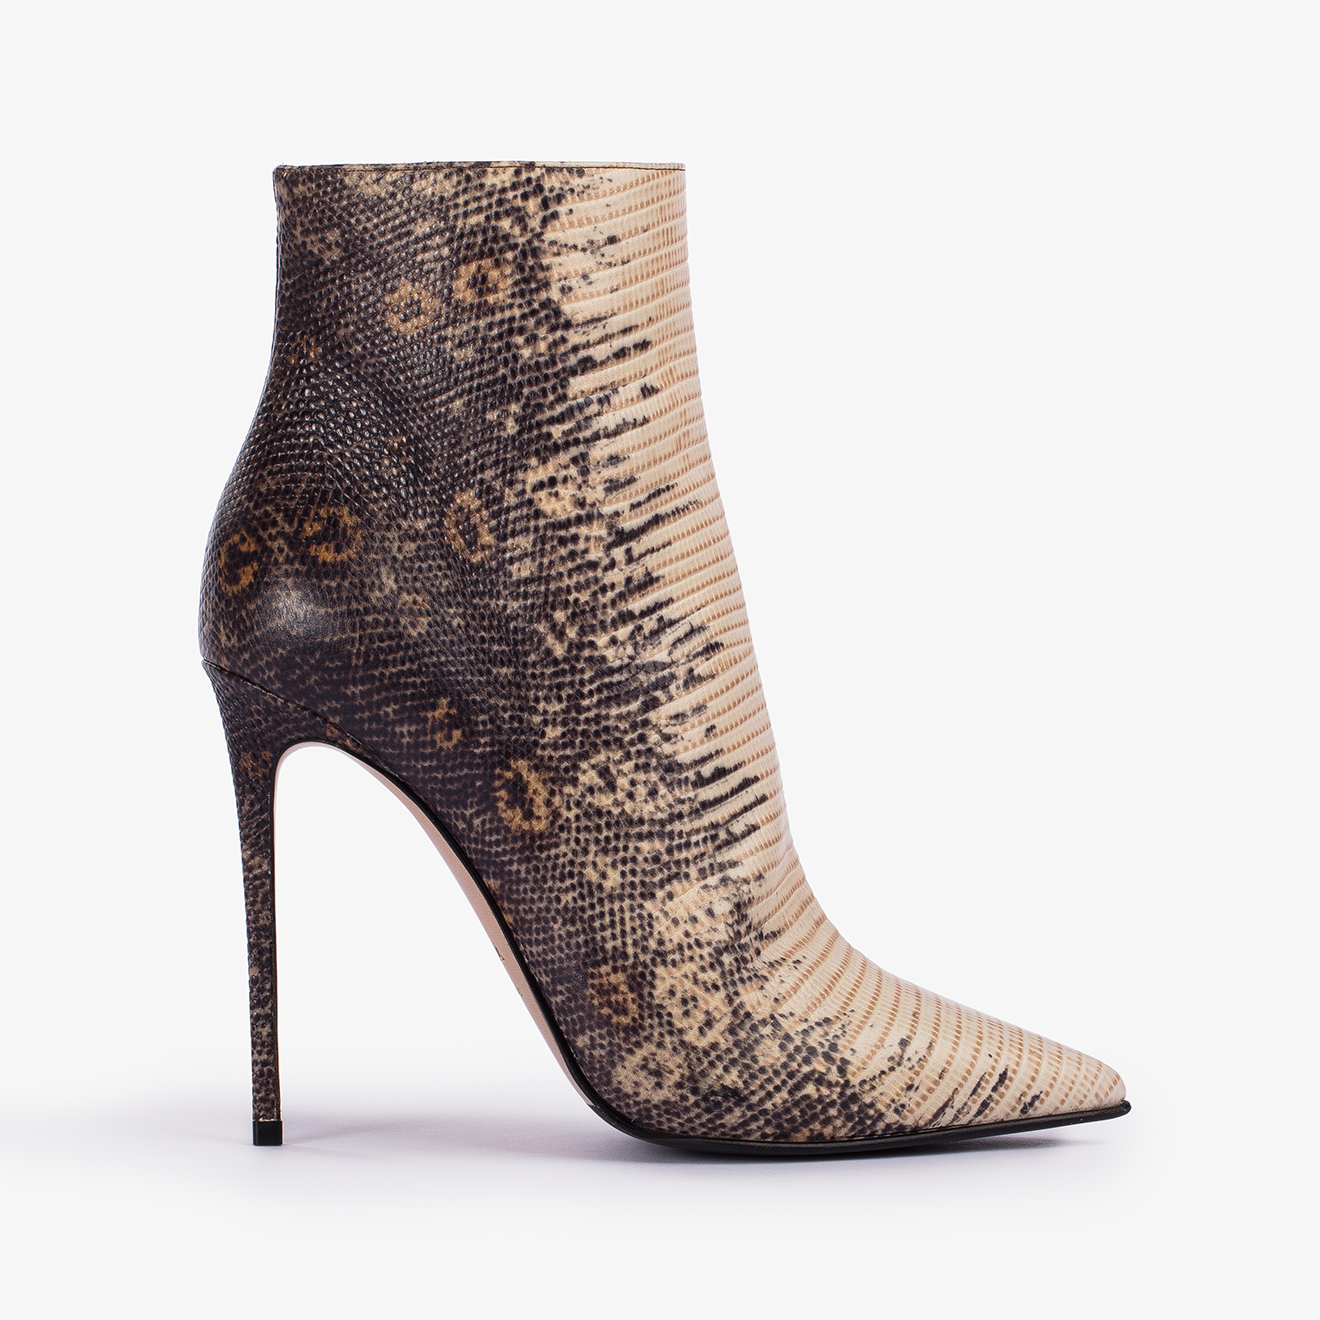 EVA ANKLE BOOT 120 mm - Le Silla official outlet